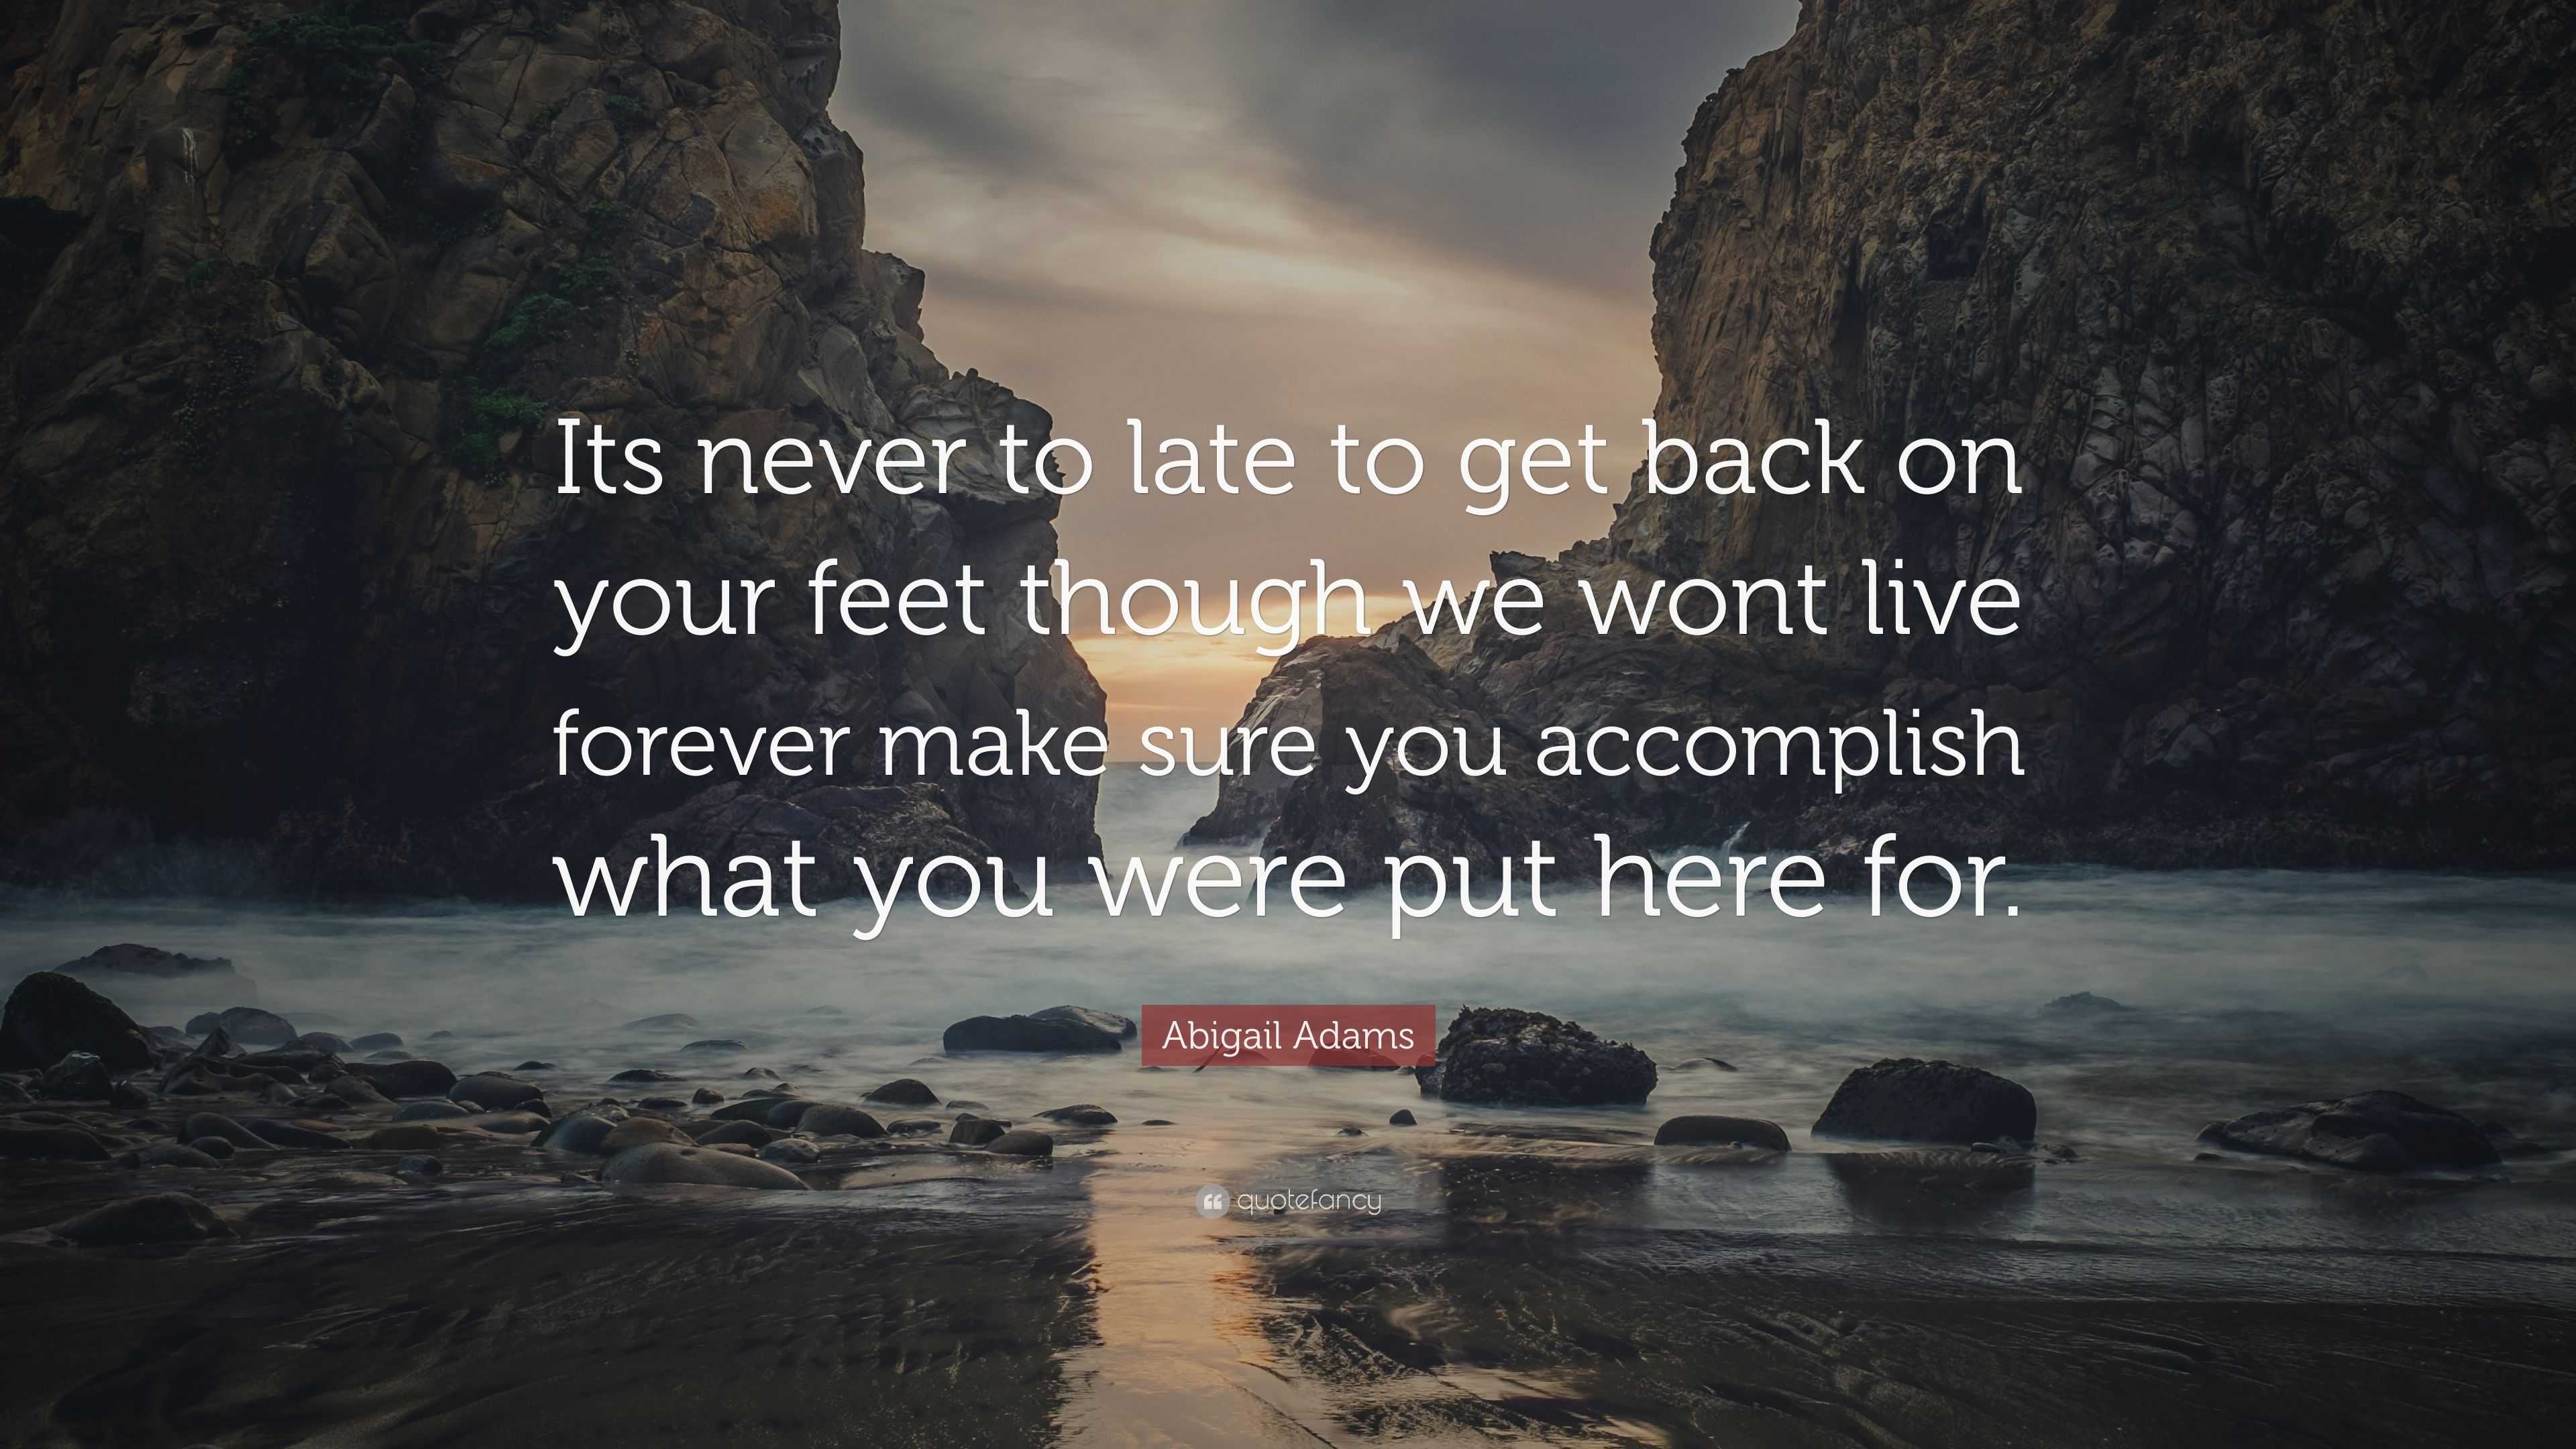 Abigail Adams Quote: “Its never to late to get back on your feet though ...